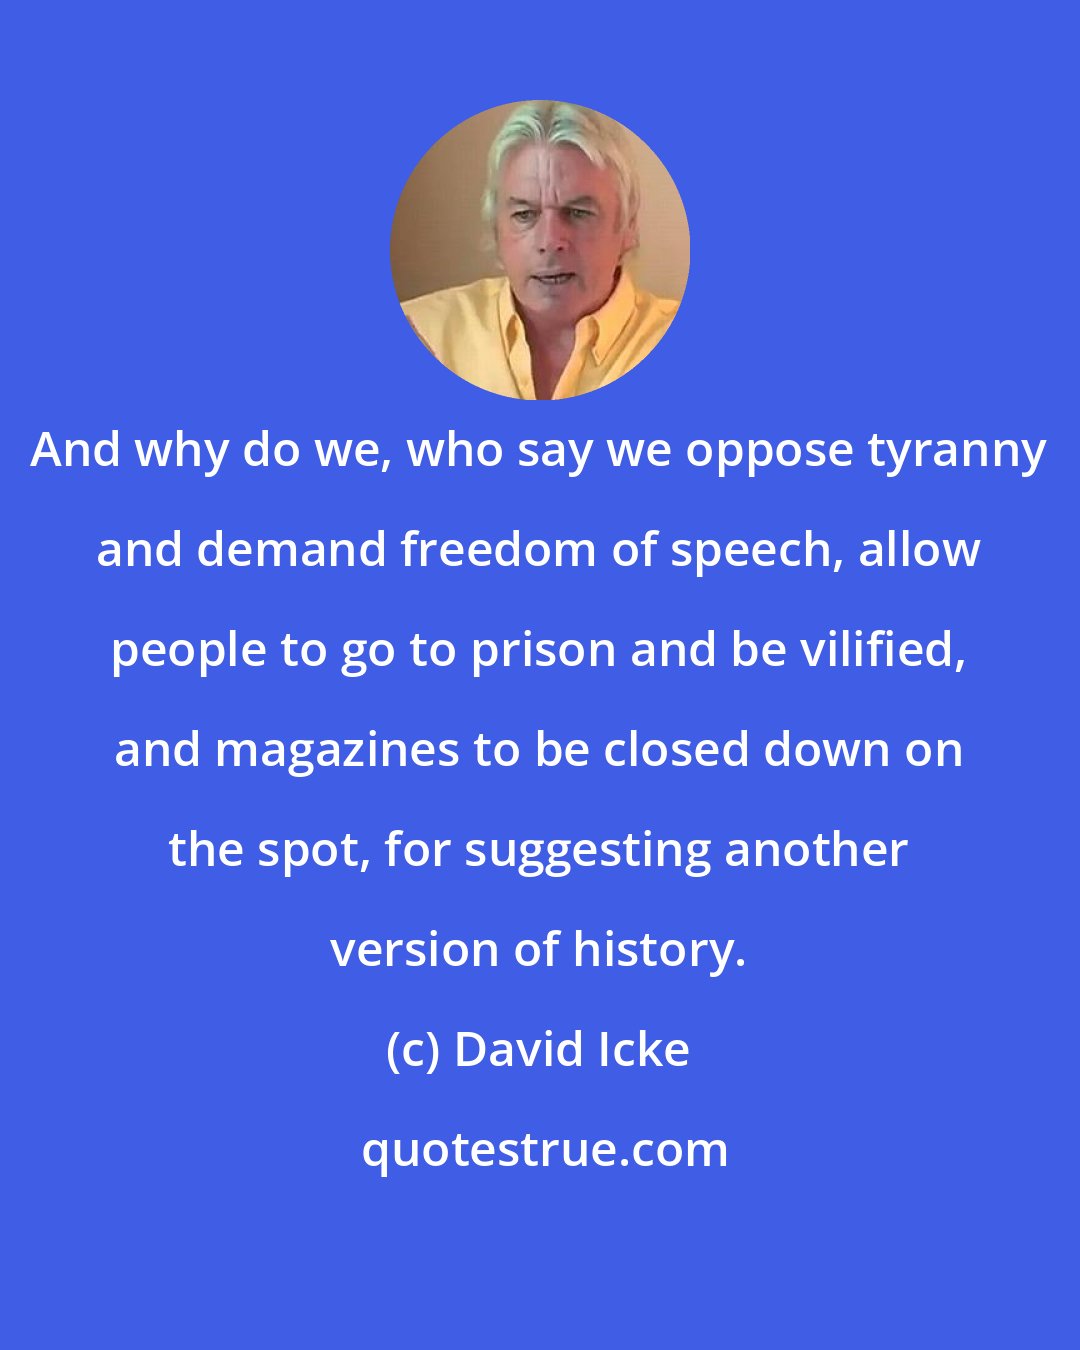 David Icke: And why do we, who say we oppose tyranny and demand freedom of speech, allow people to go to prison and be vilified, and magazines to be closed down on the spot, for suggesting another version of history.